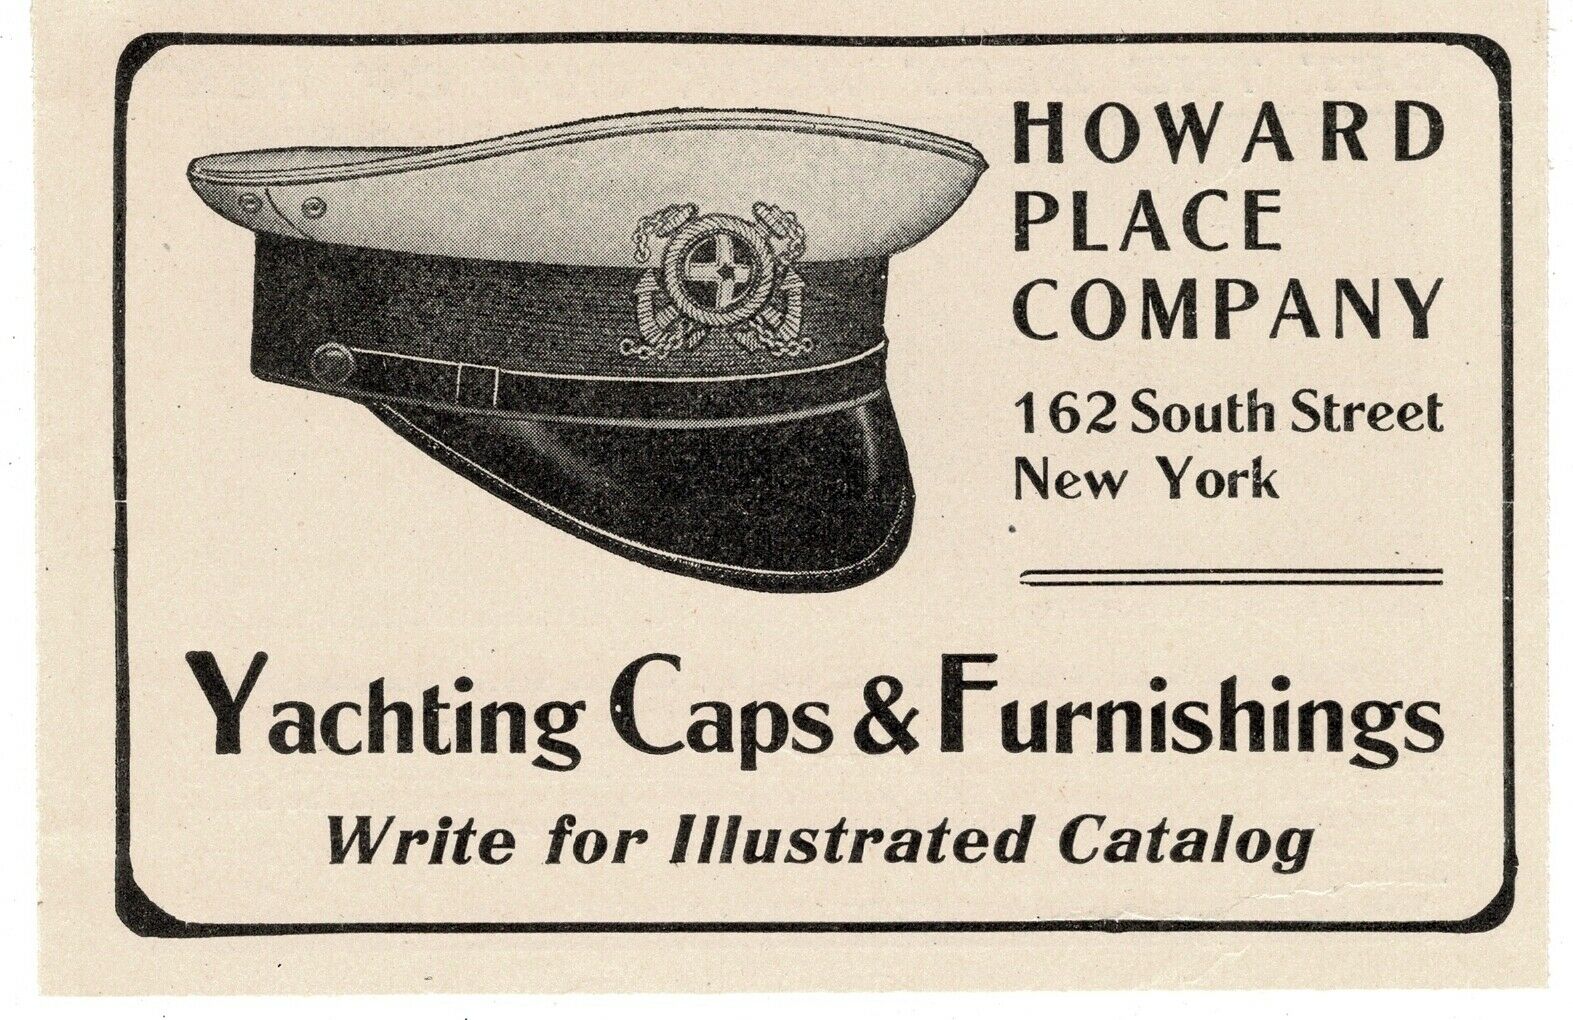 1911 Howard Place Co. Yachting Caps & Furnishings Vintage Print Ad